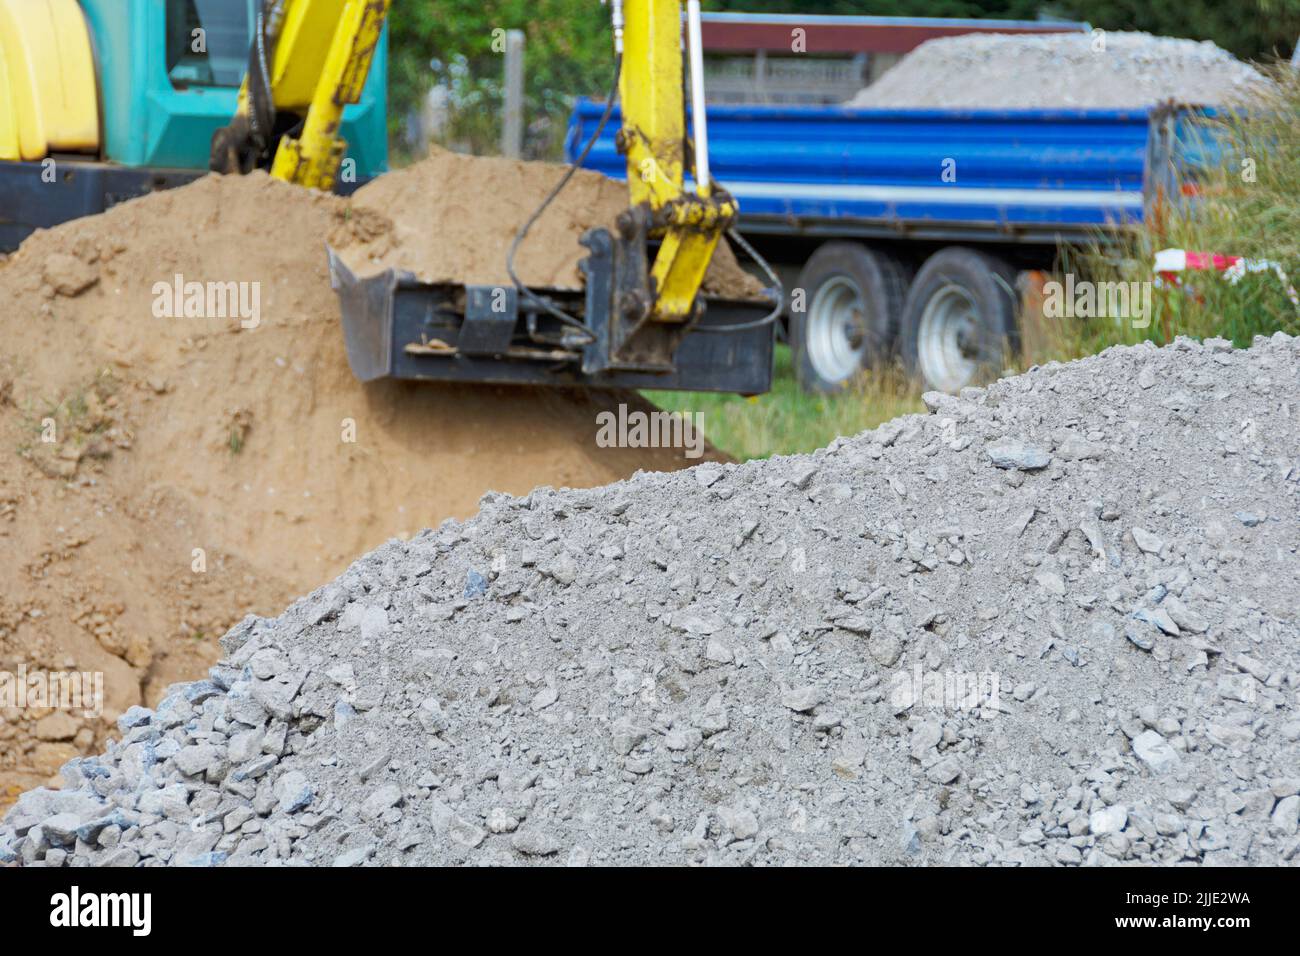 Soil replacement - excavator with full excavator bucket and pile of crushed rock in the foreground Stock Photo